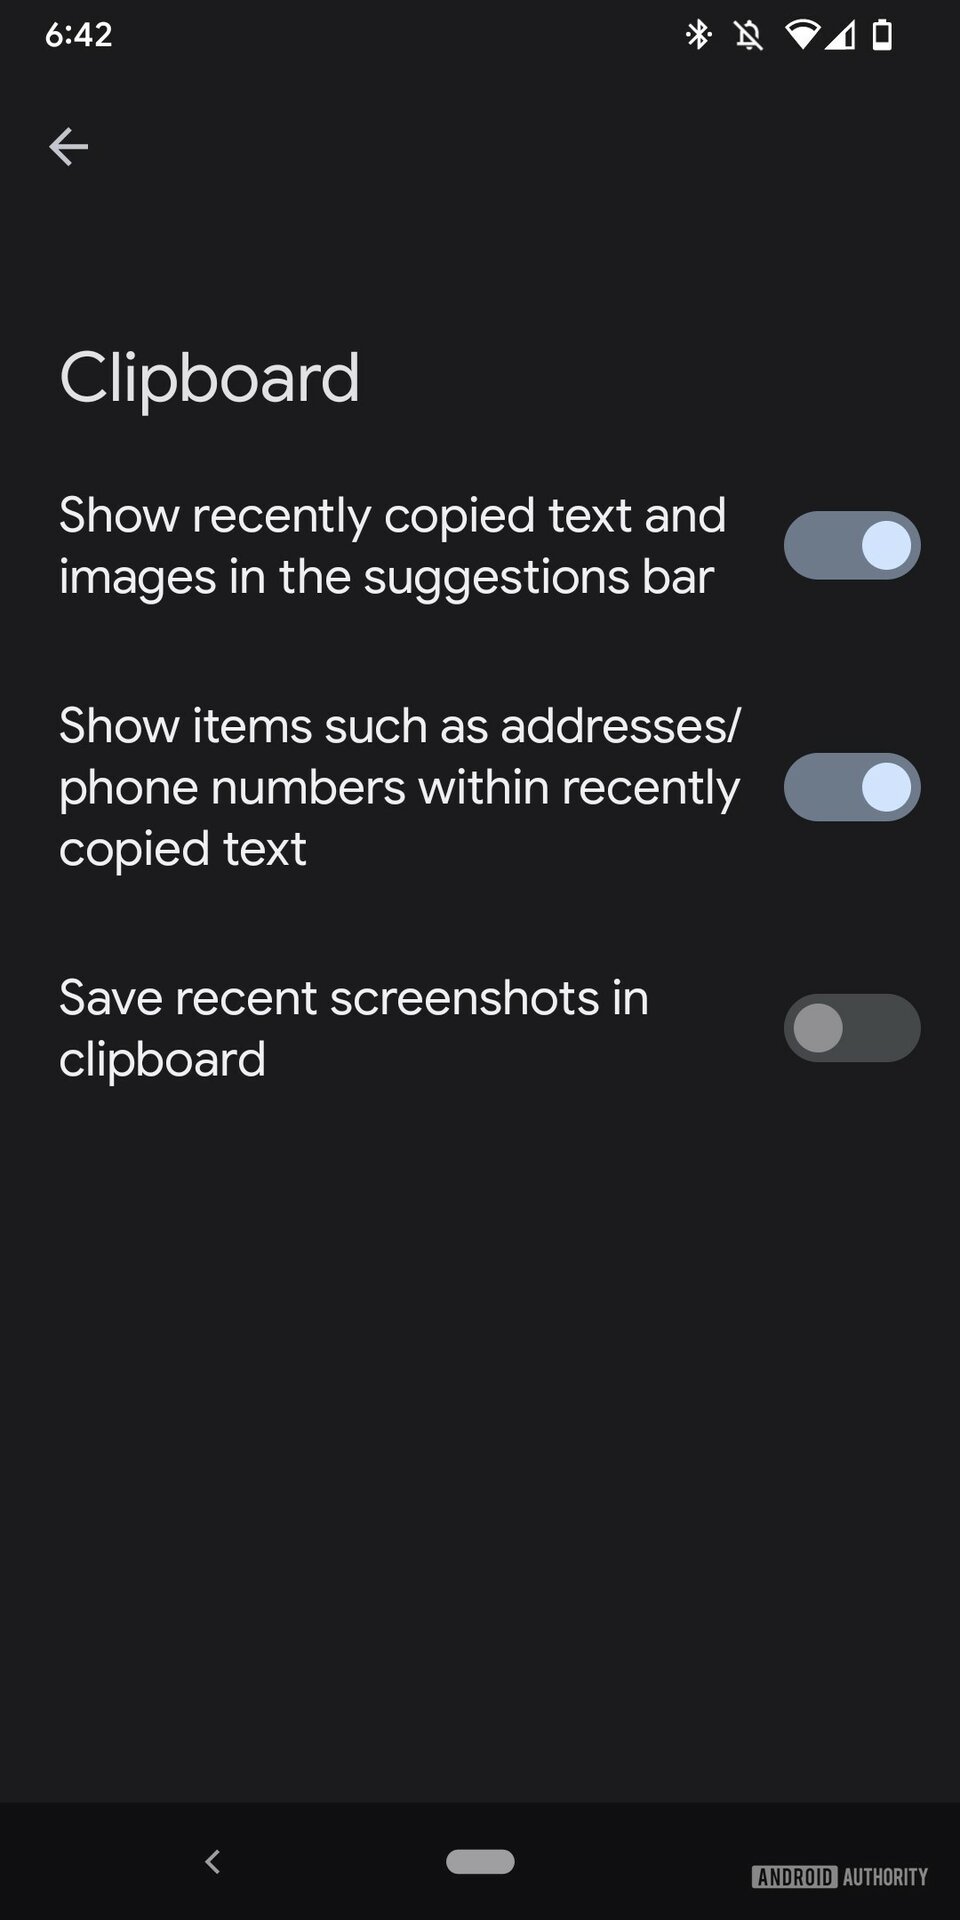 A screenshot of the Android clipboard settings options.